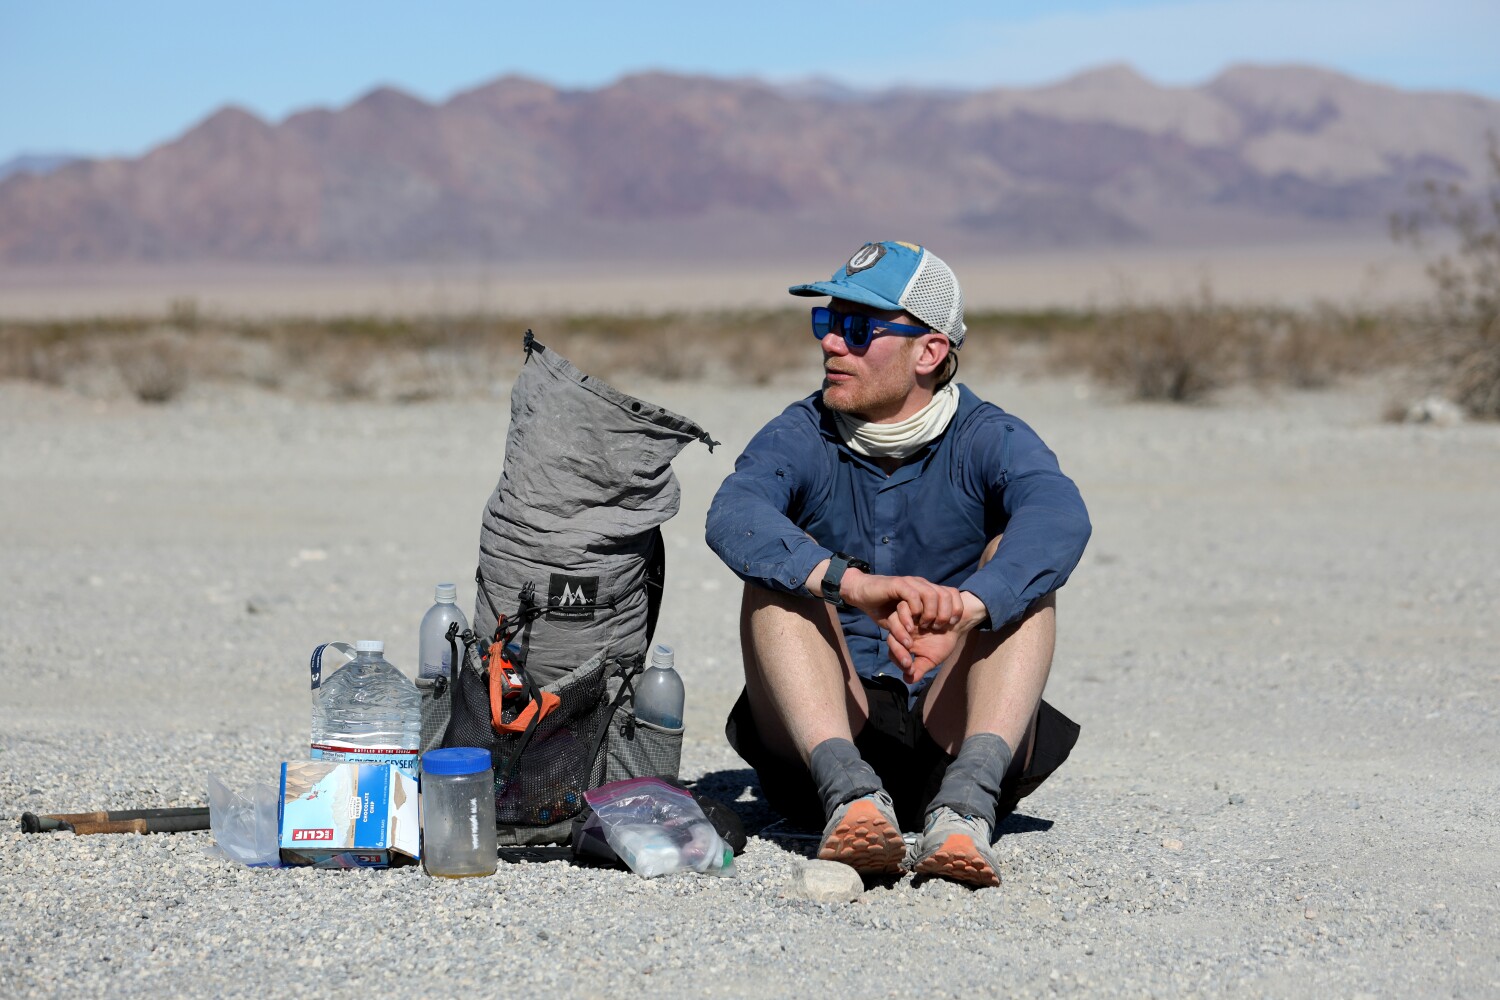 Blisters, nausea, hallucinations: A hiker's grueling attempt to cross Death Valley in four days